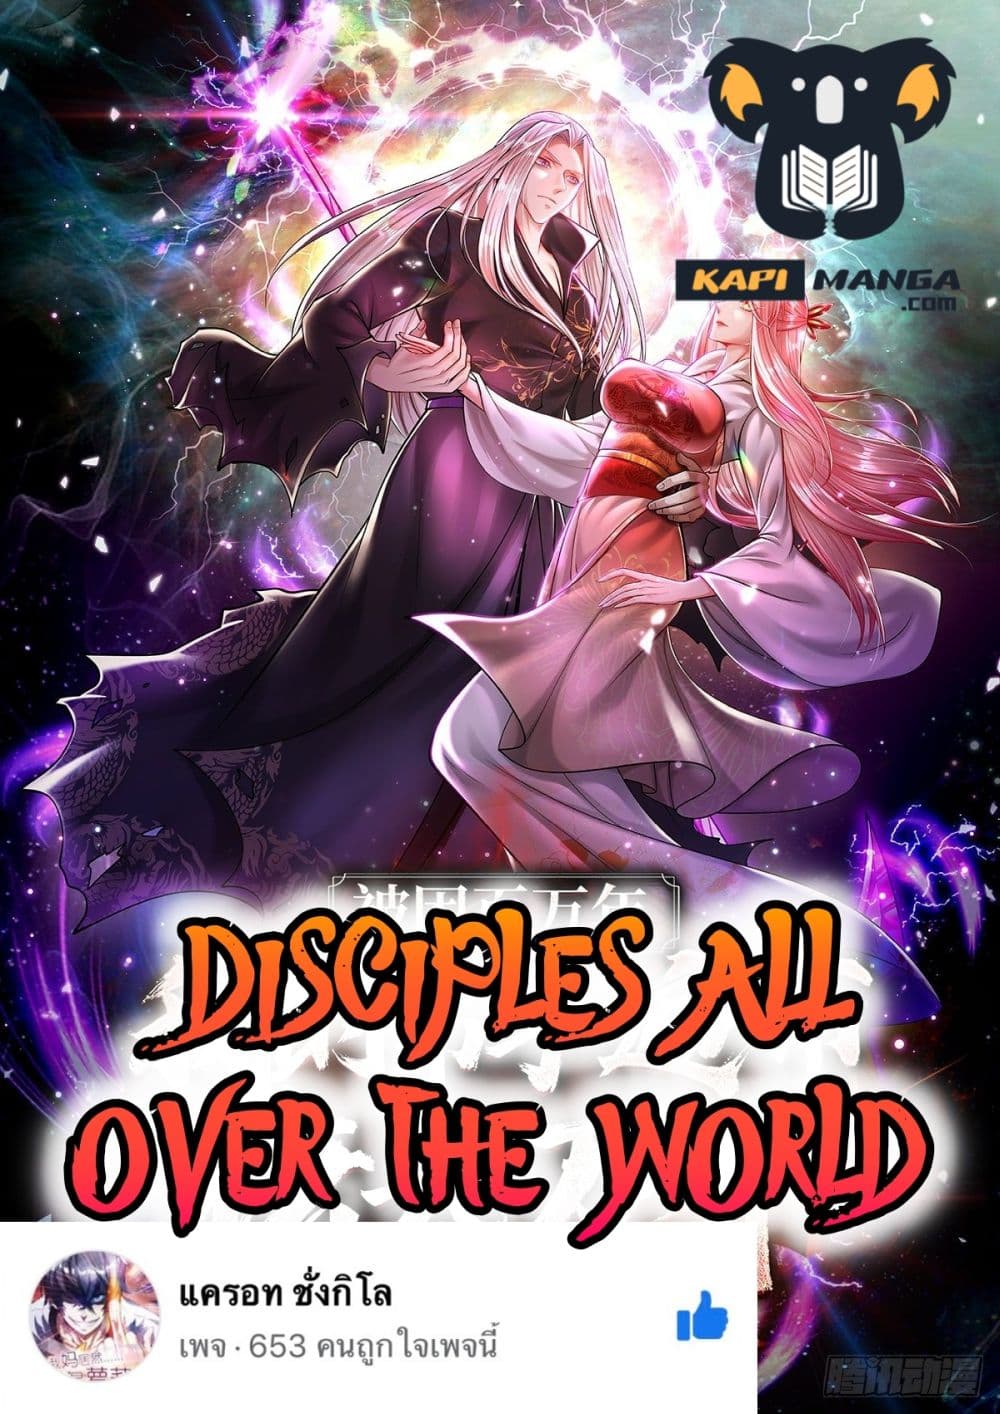 Disciples All Over the World à¸à¸­à¸à¸à¸µà¹ 75 (1)